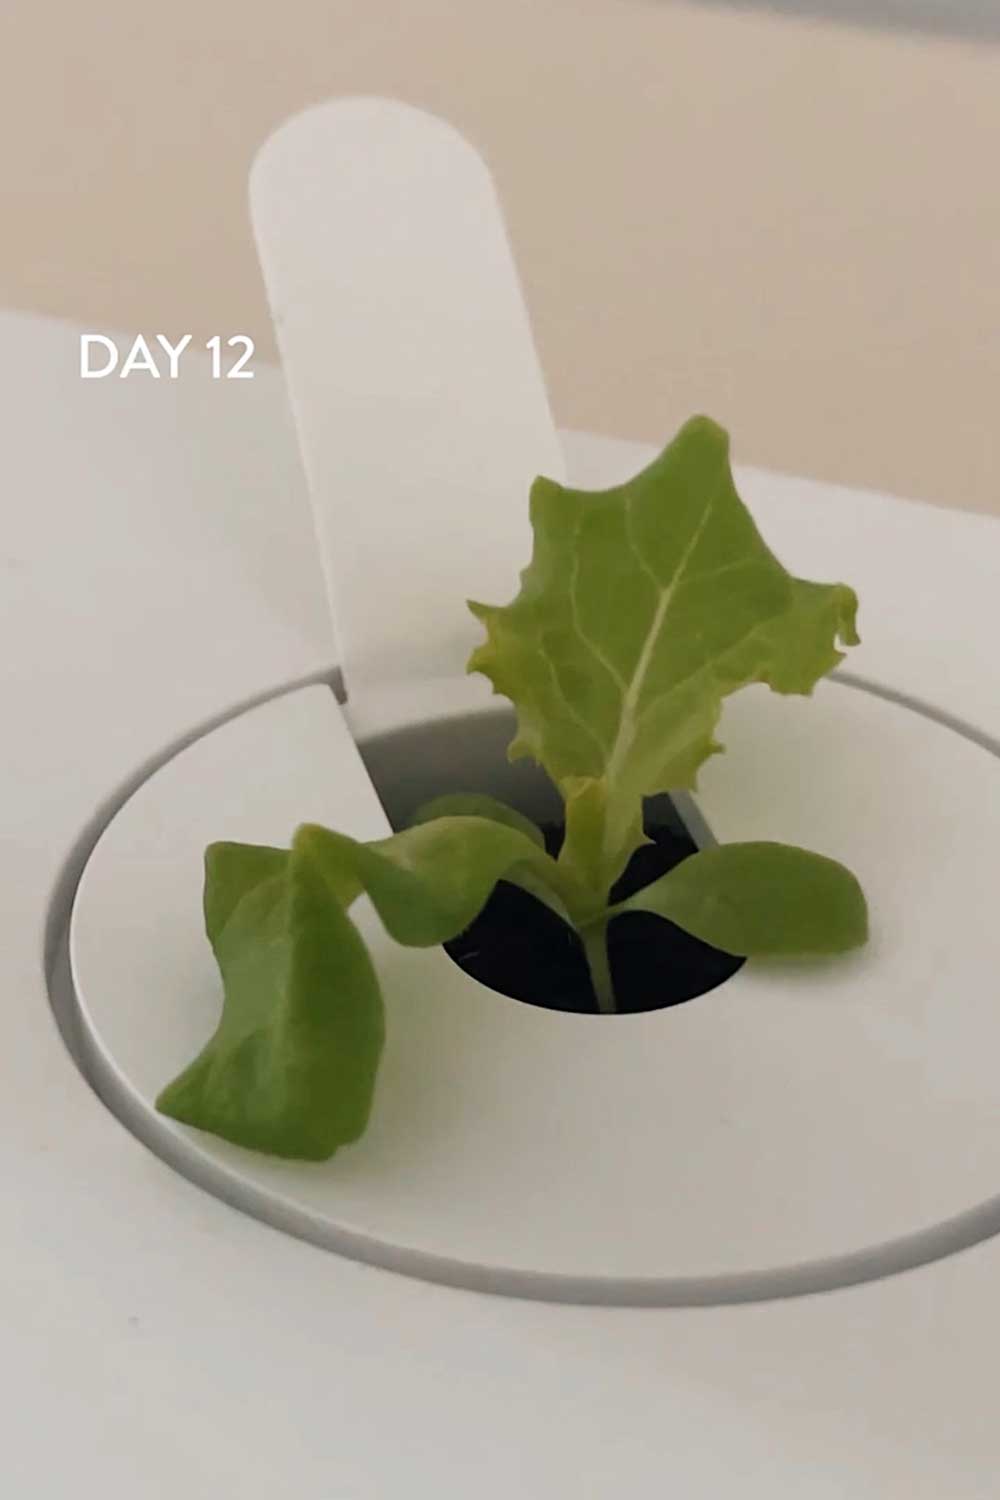 how-to-grow-hydroponic-salad-greens-indoors